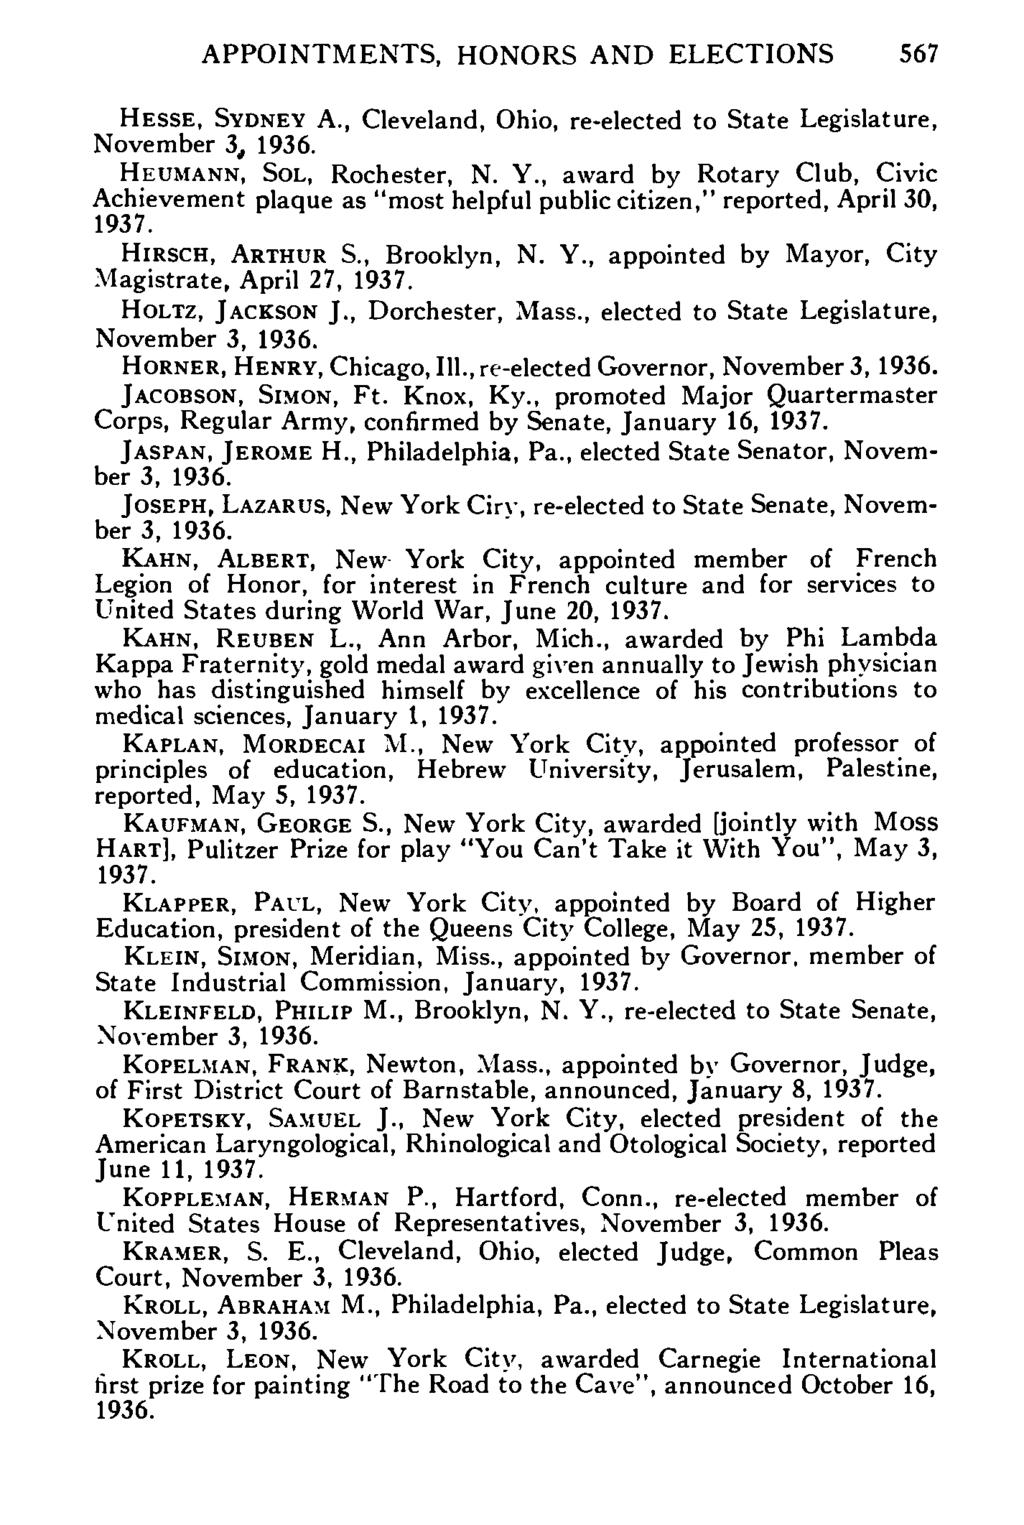 APPOINTMENTS, HONORS AND ELECTIONS 567 HESSE, SYDNEY A., Cleveland, Ohio, re-elected to State Legislature, HEUMANN, SOL, Rochester, N. Y.